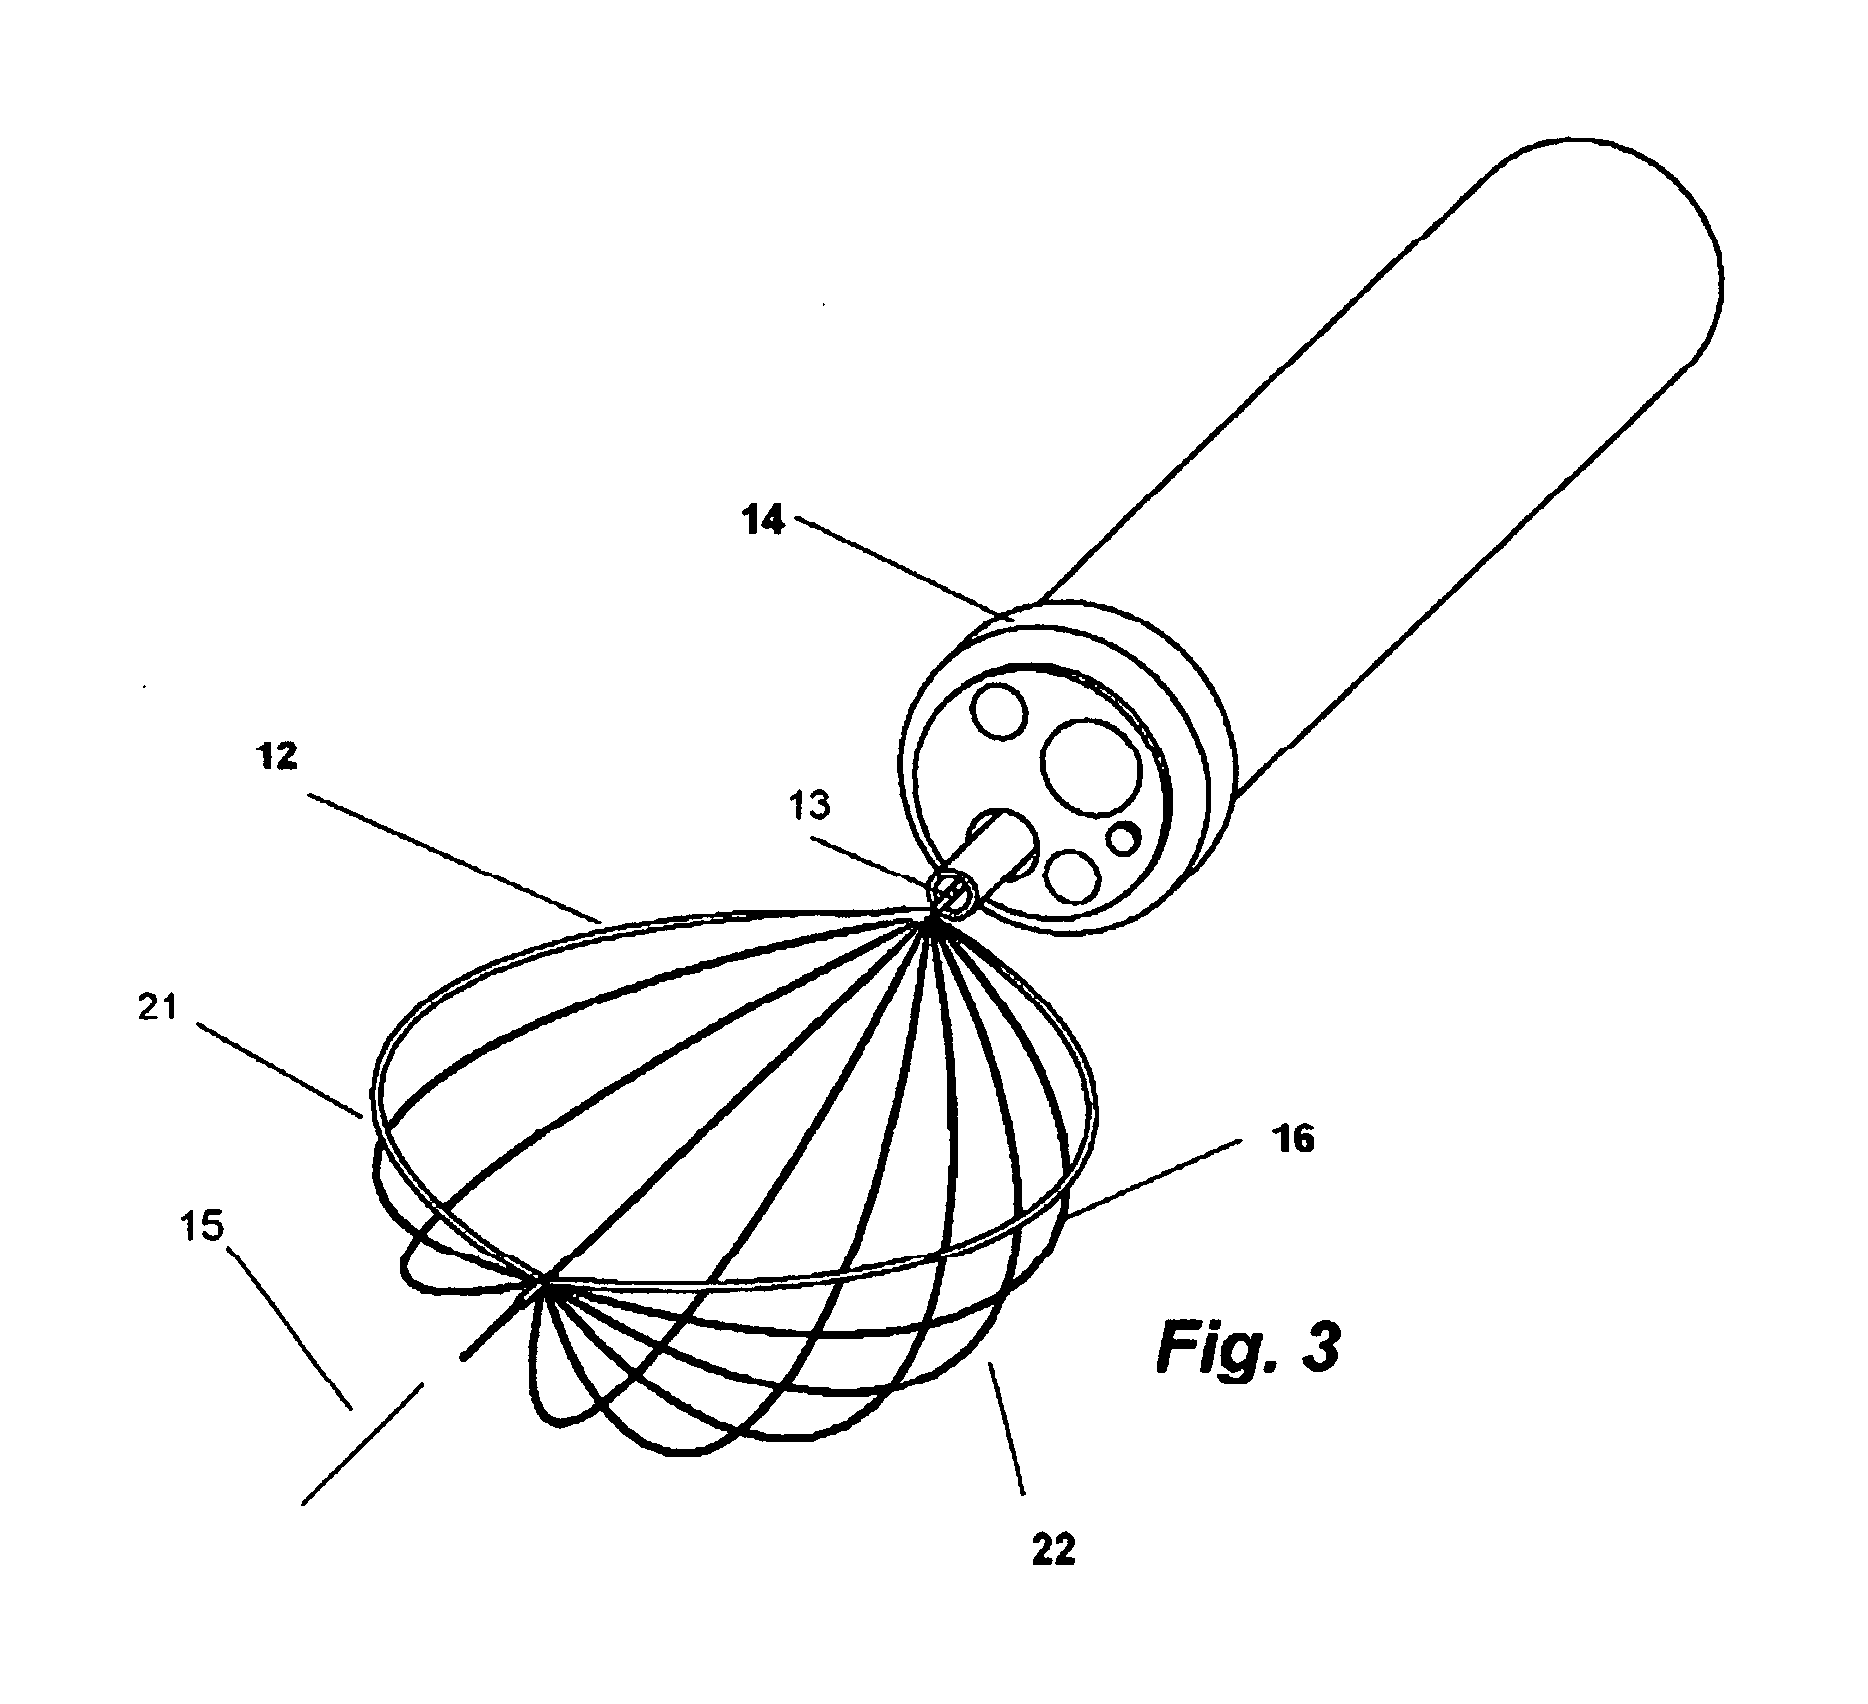 Surgical retrieval device radially deployable from collapsed position to a snare or cauterization loop